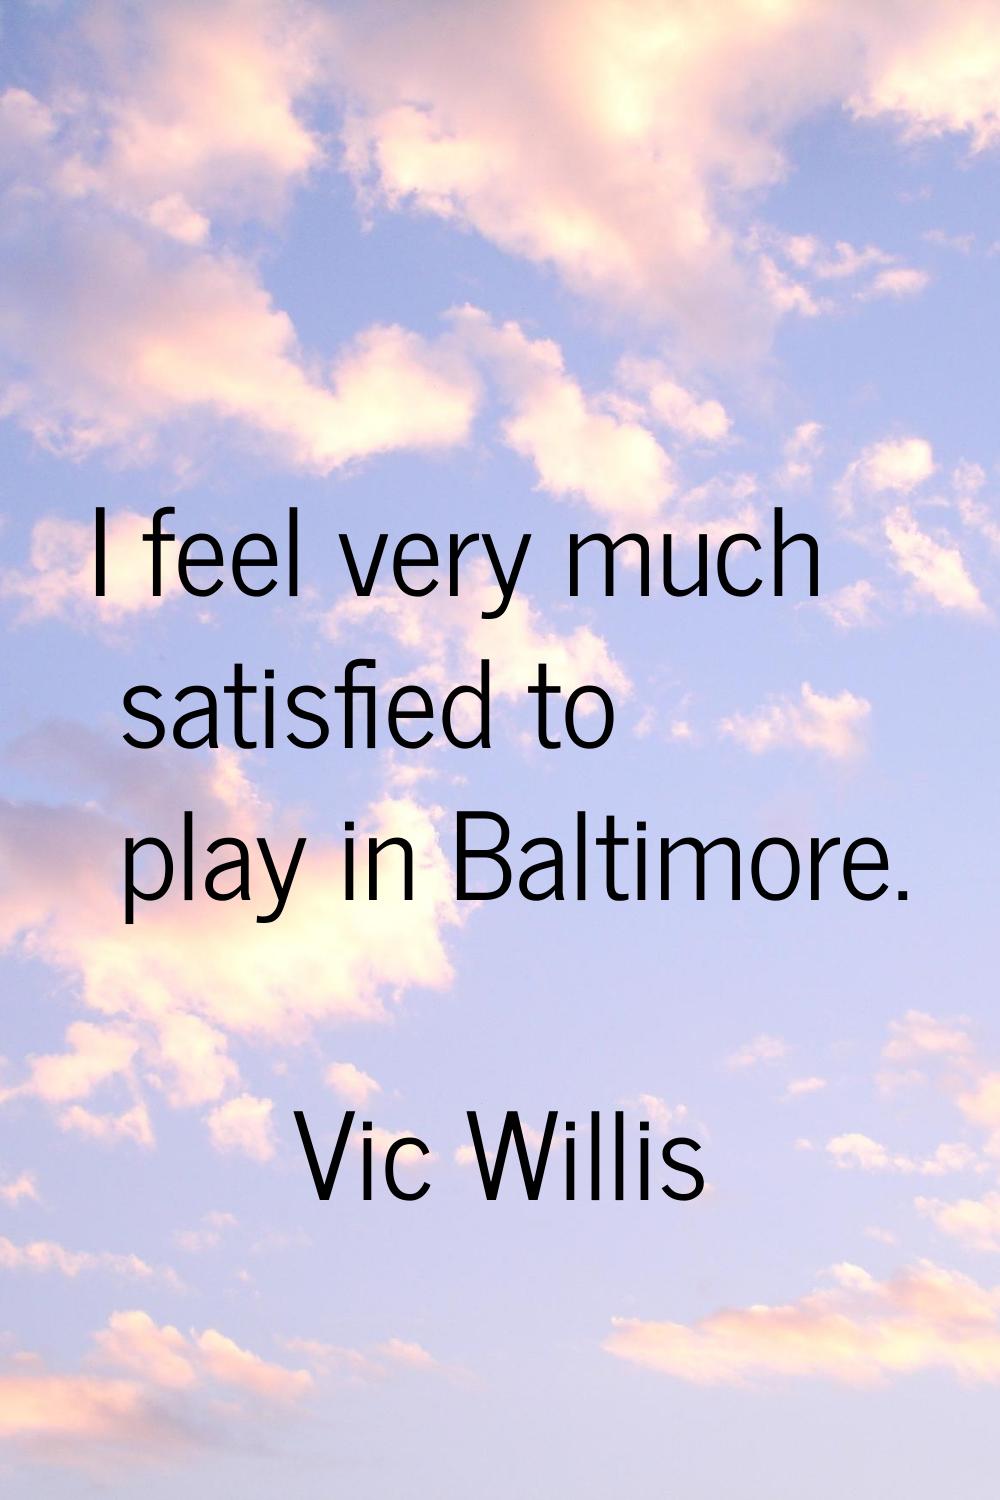 I feel very much satisfied to play in Baltimore.